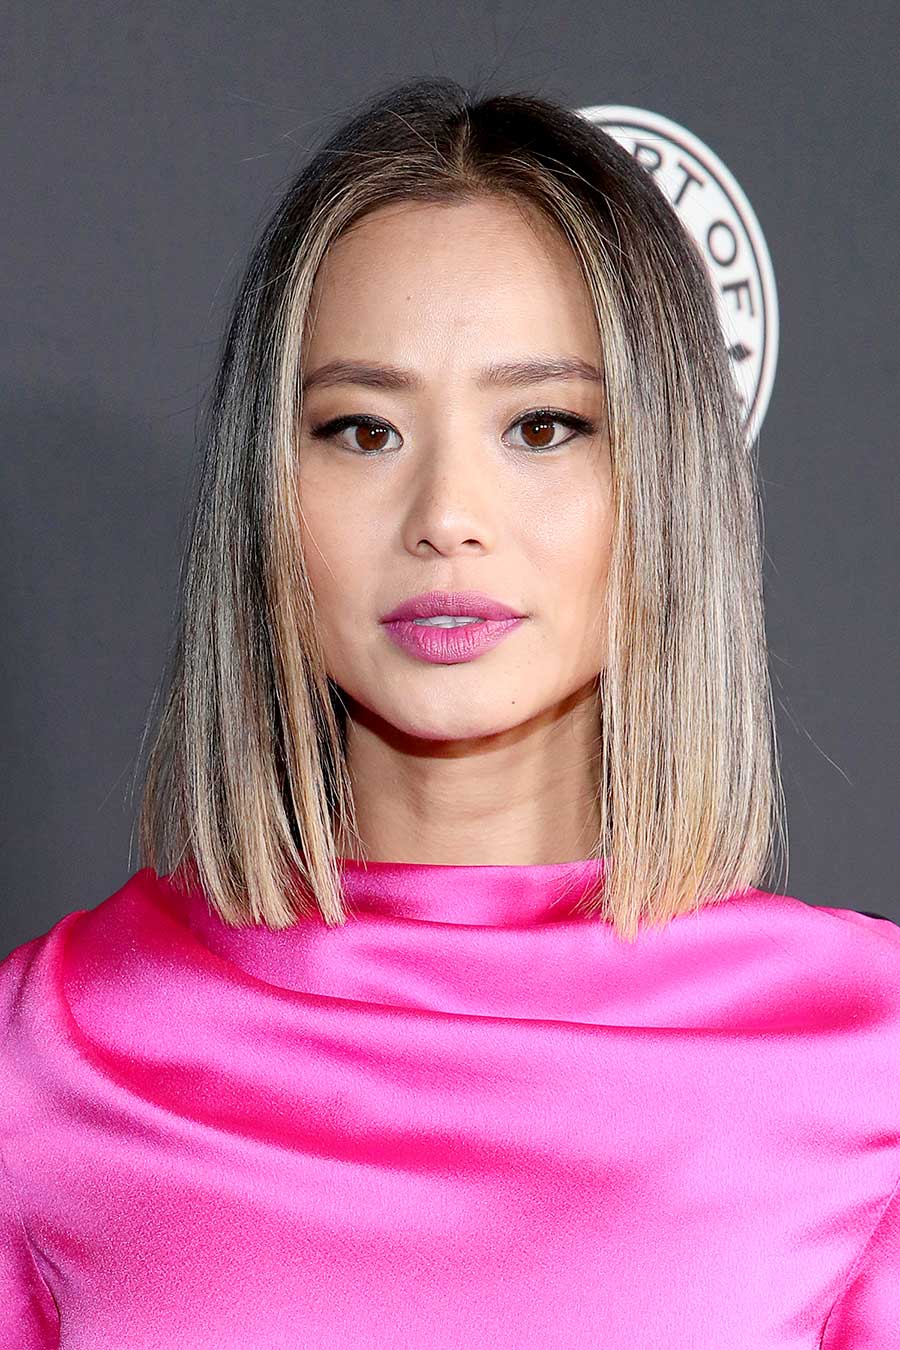 Jamie Chung attends The Art Of Elysium's 13th Annual Celebration in Los Angeles, California.